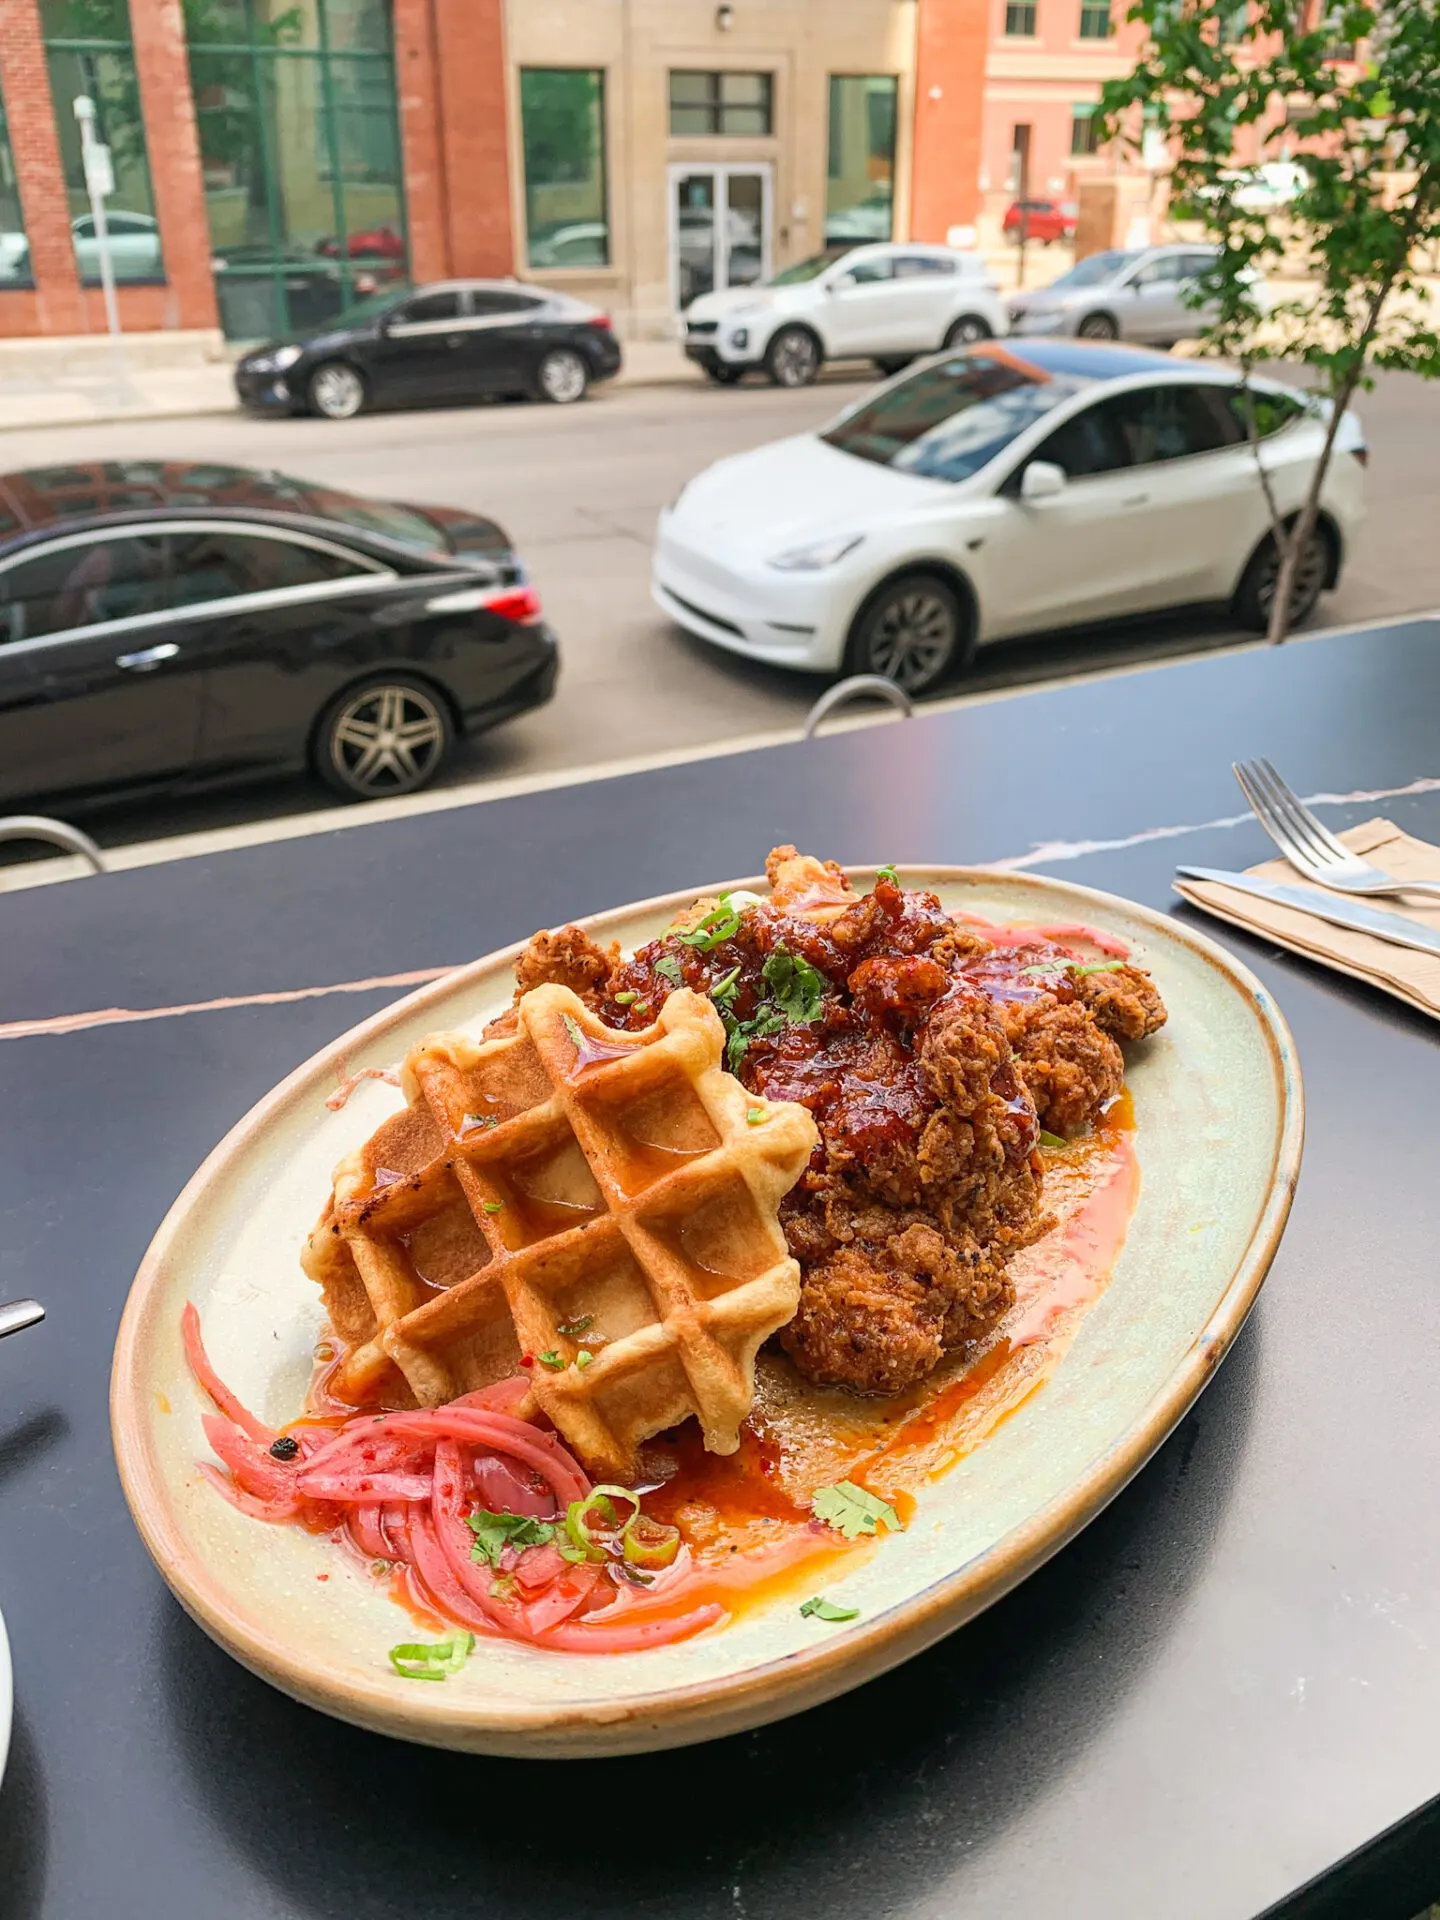 Korean Fried Chicken and Waffles from ZCREW Cafe in Calgary, Alberta